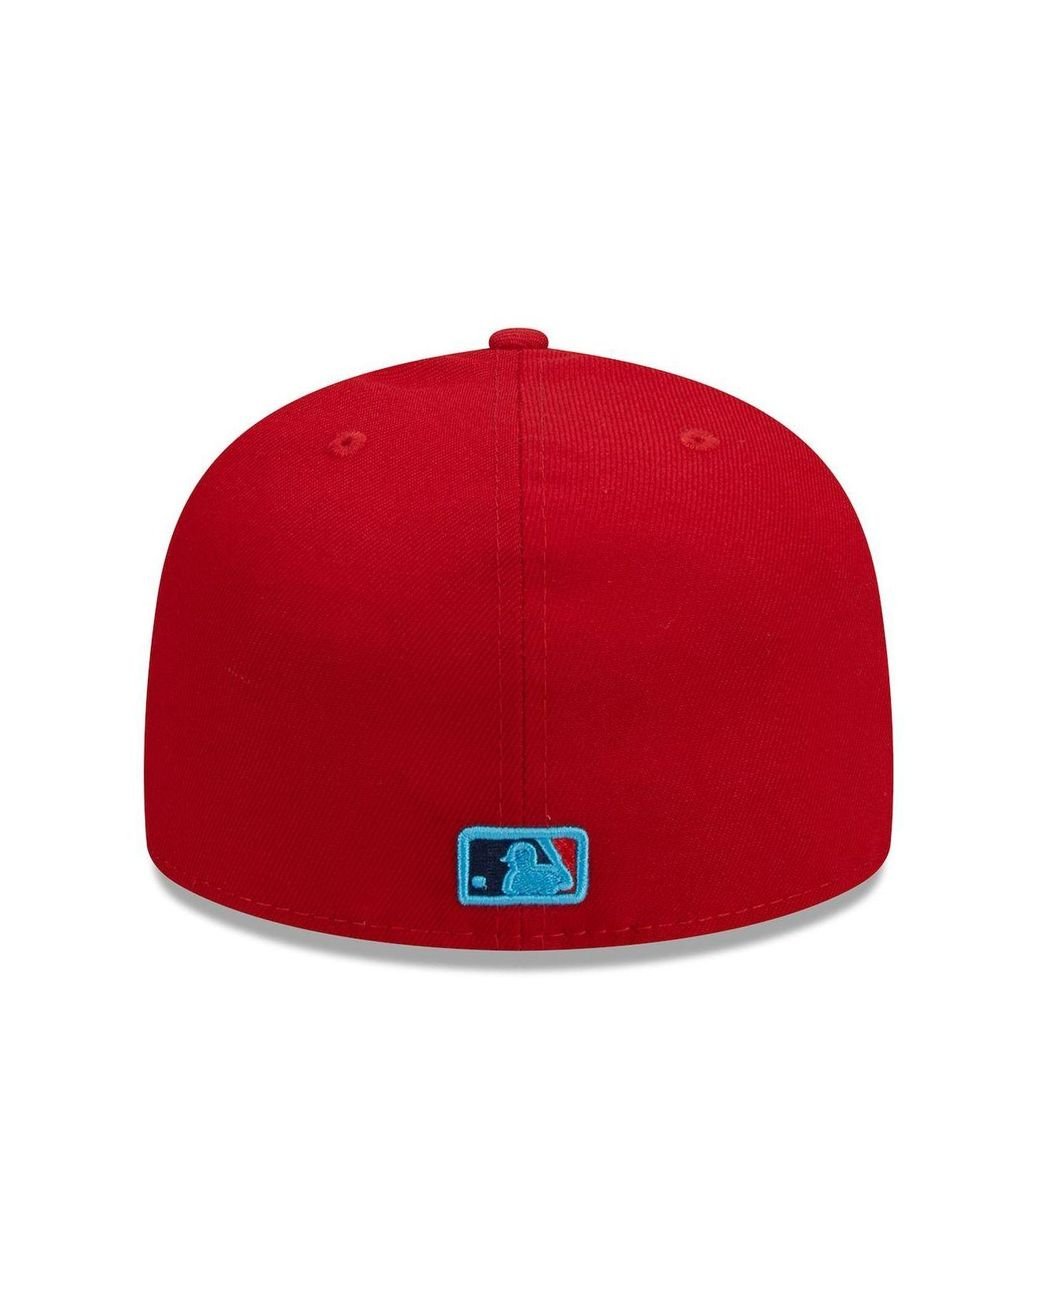 St. Louis Cardinals 2021 Armed Forces Day 9FORTY Hat - New Era